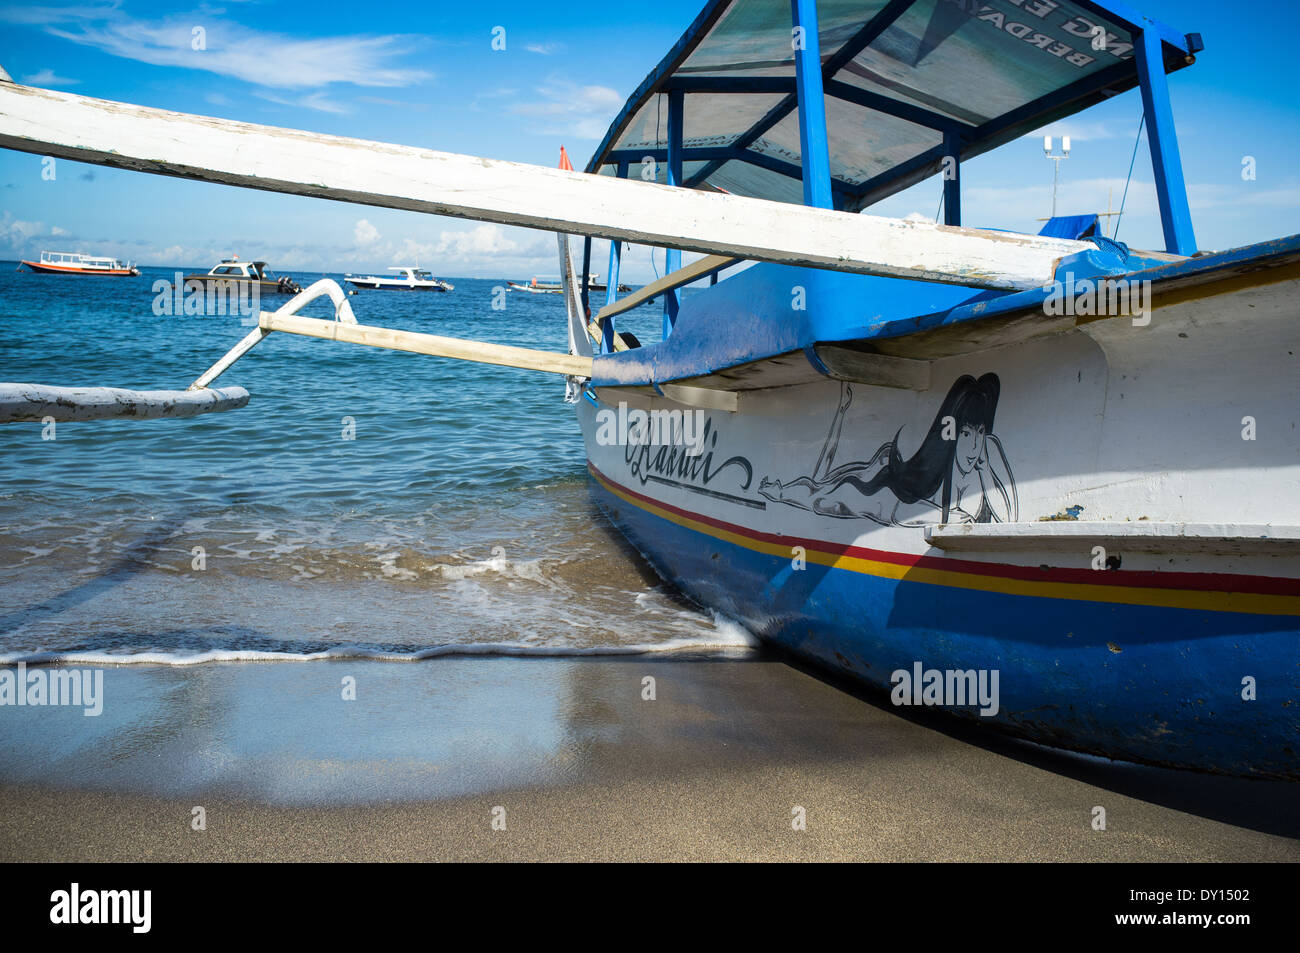 traditional style tourist boat in the shallow waters of Gili Trawangan Lombok Indonesia, Asia Stock Photo